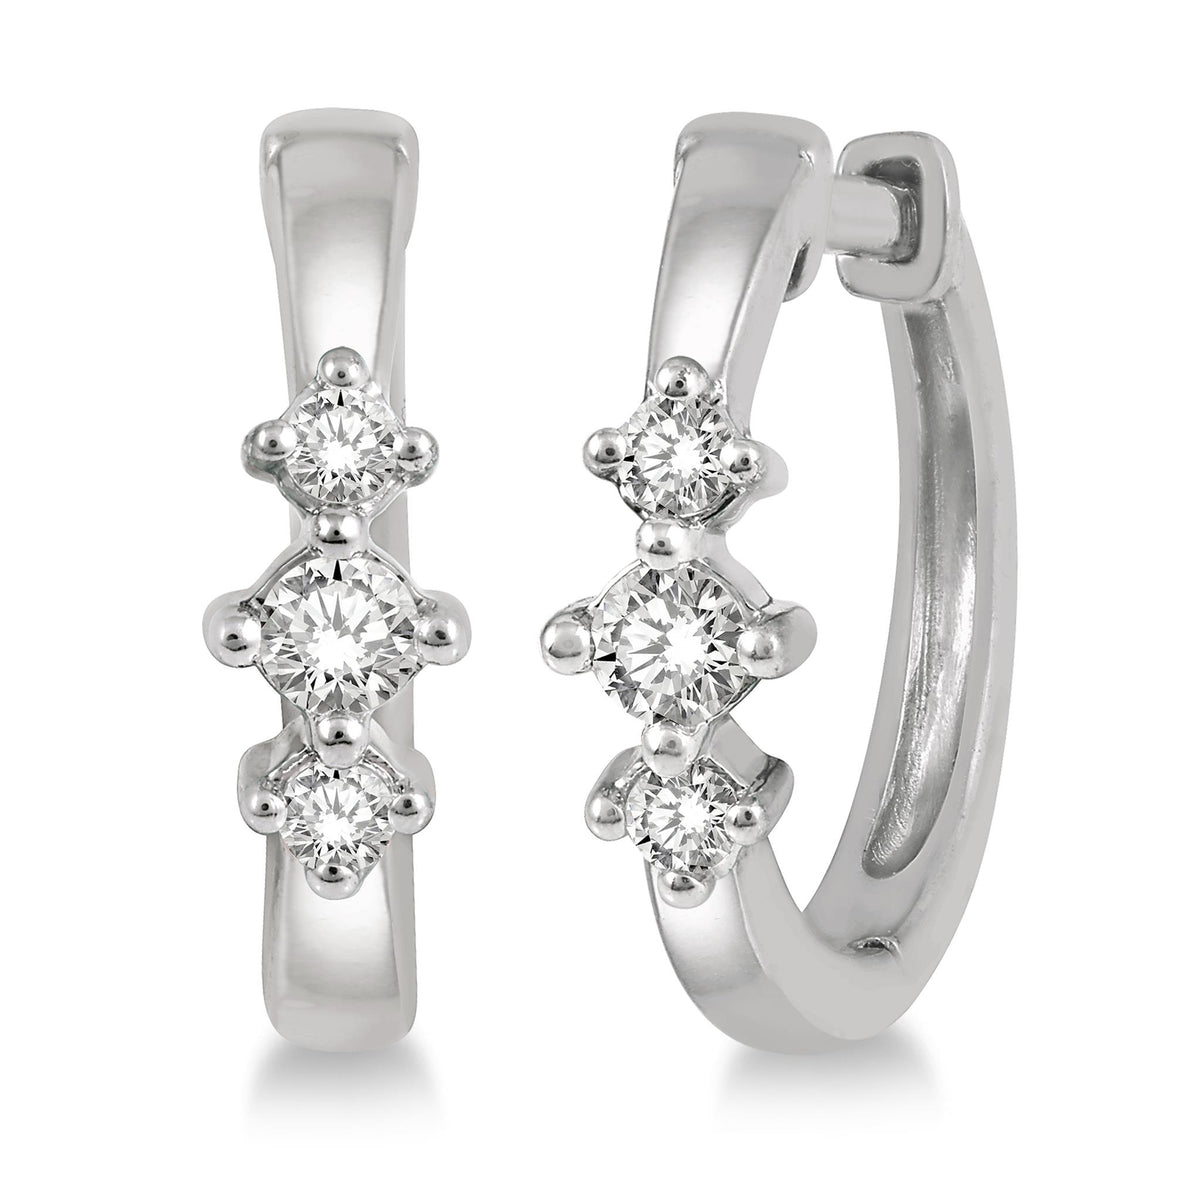 Lasker Petites-10Kt White Gold Round Hoop Earrings With 0.15cttw Natural Diamonds